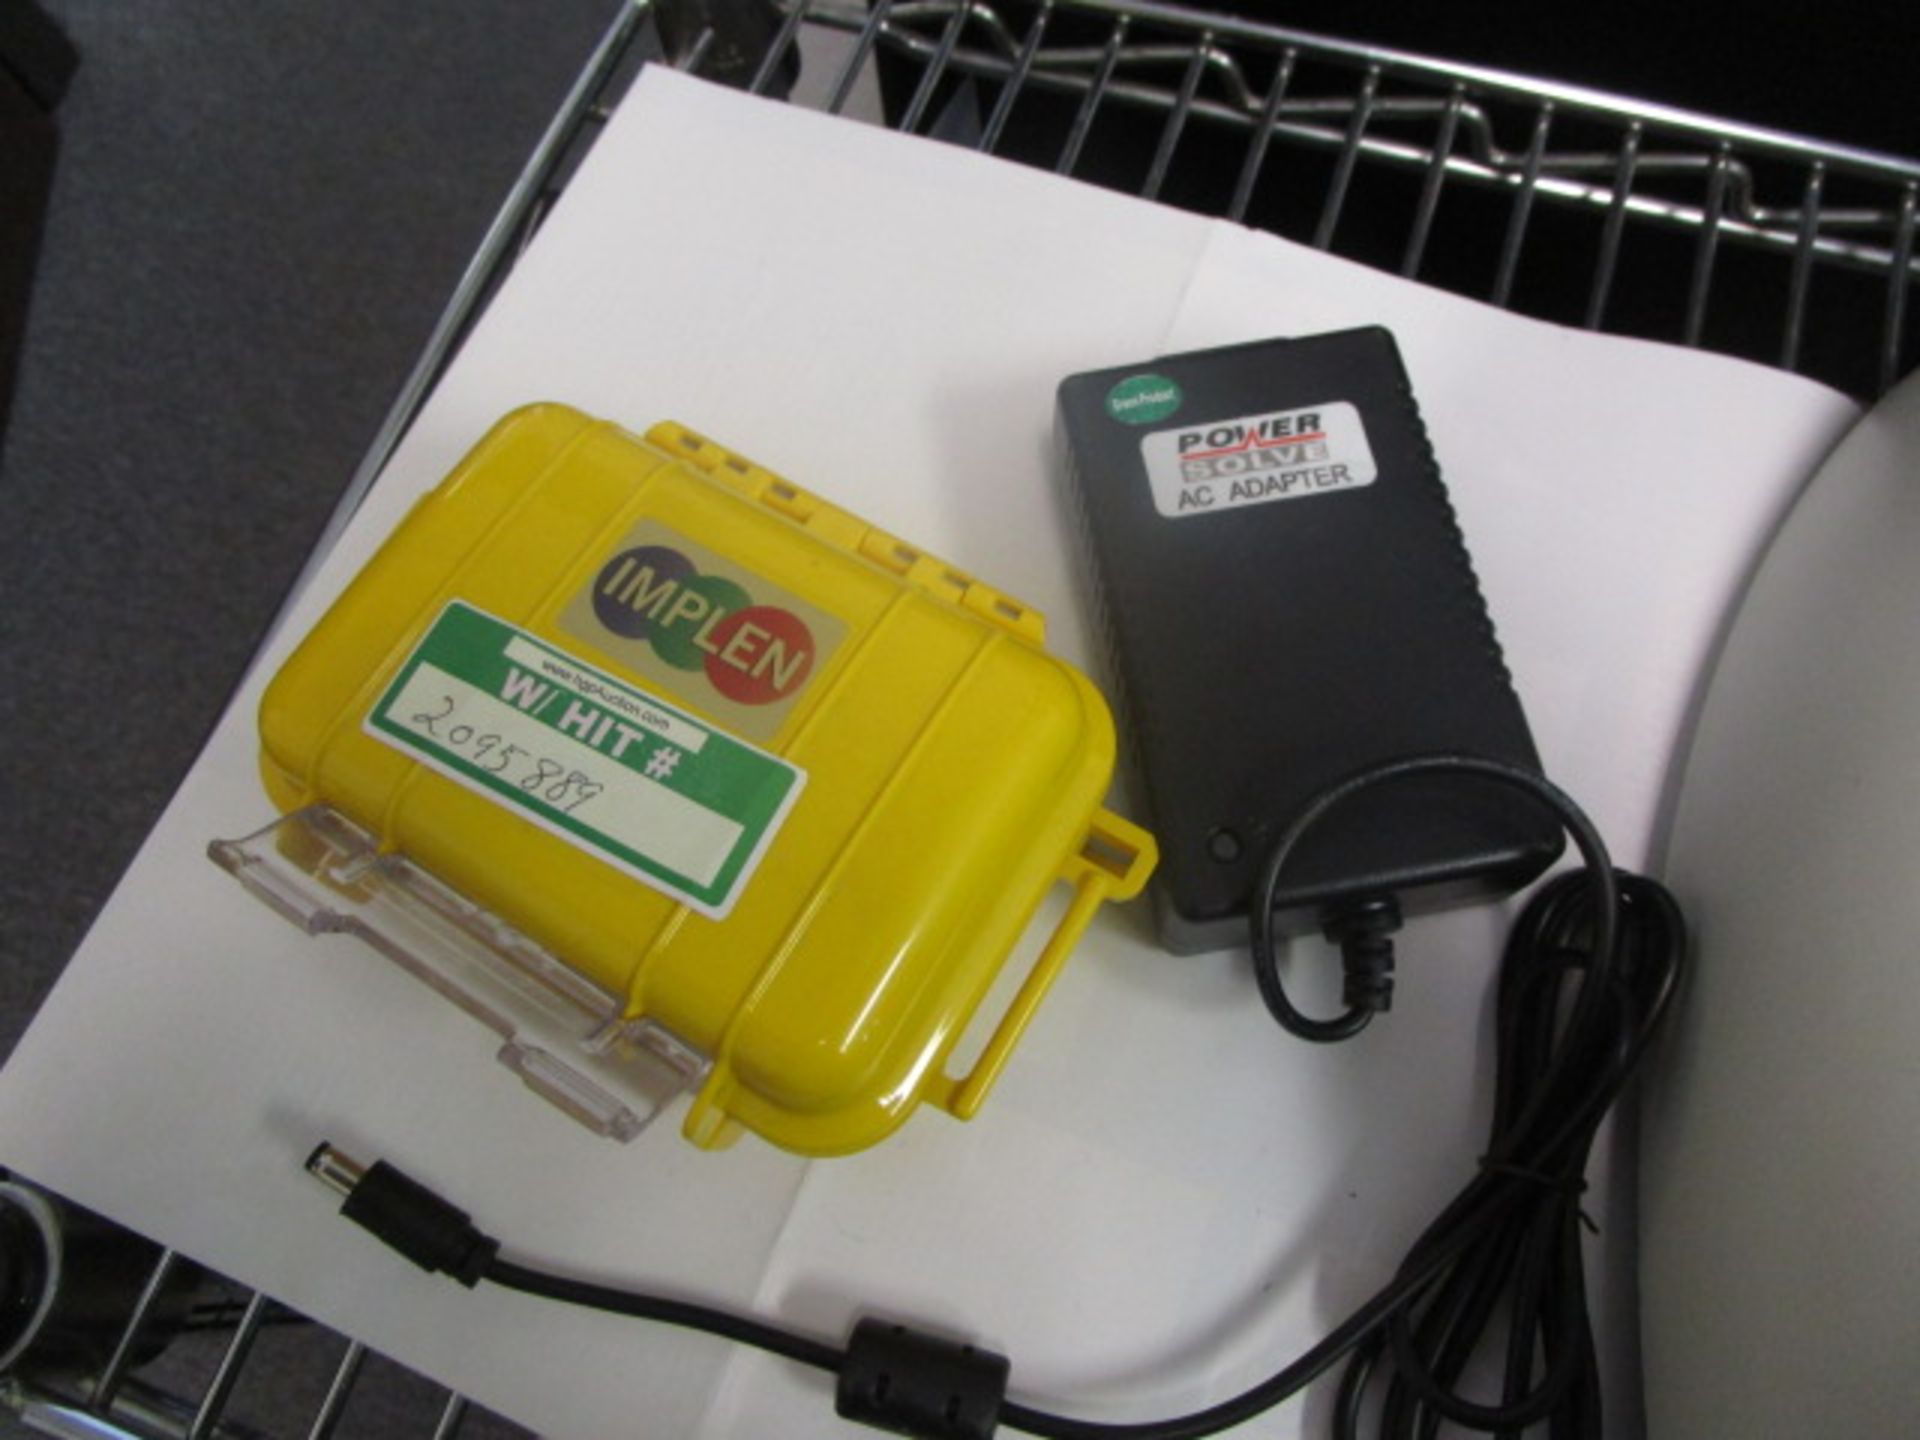 IMPLEN Nanophotometer P-Class P300 with power solve AC Adapter with accessory - Image 5 of 9